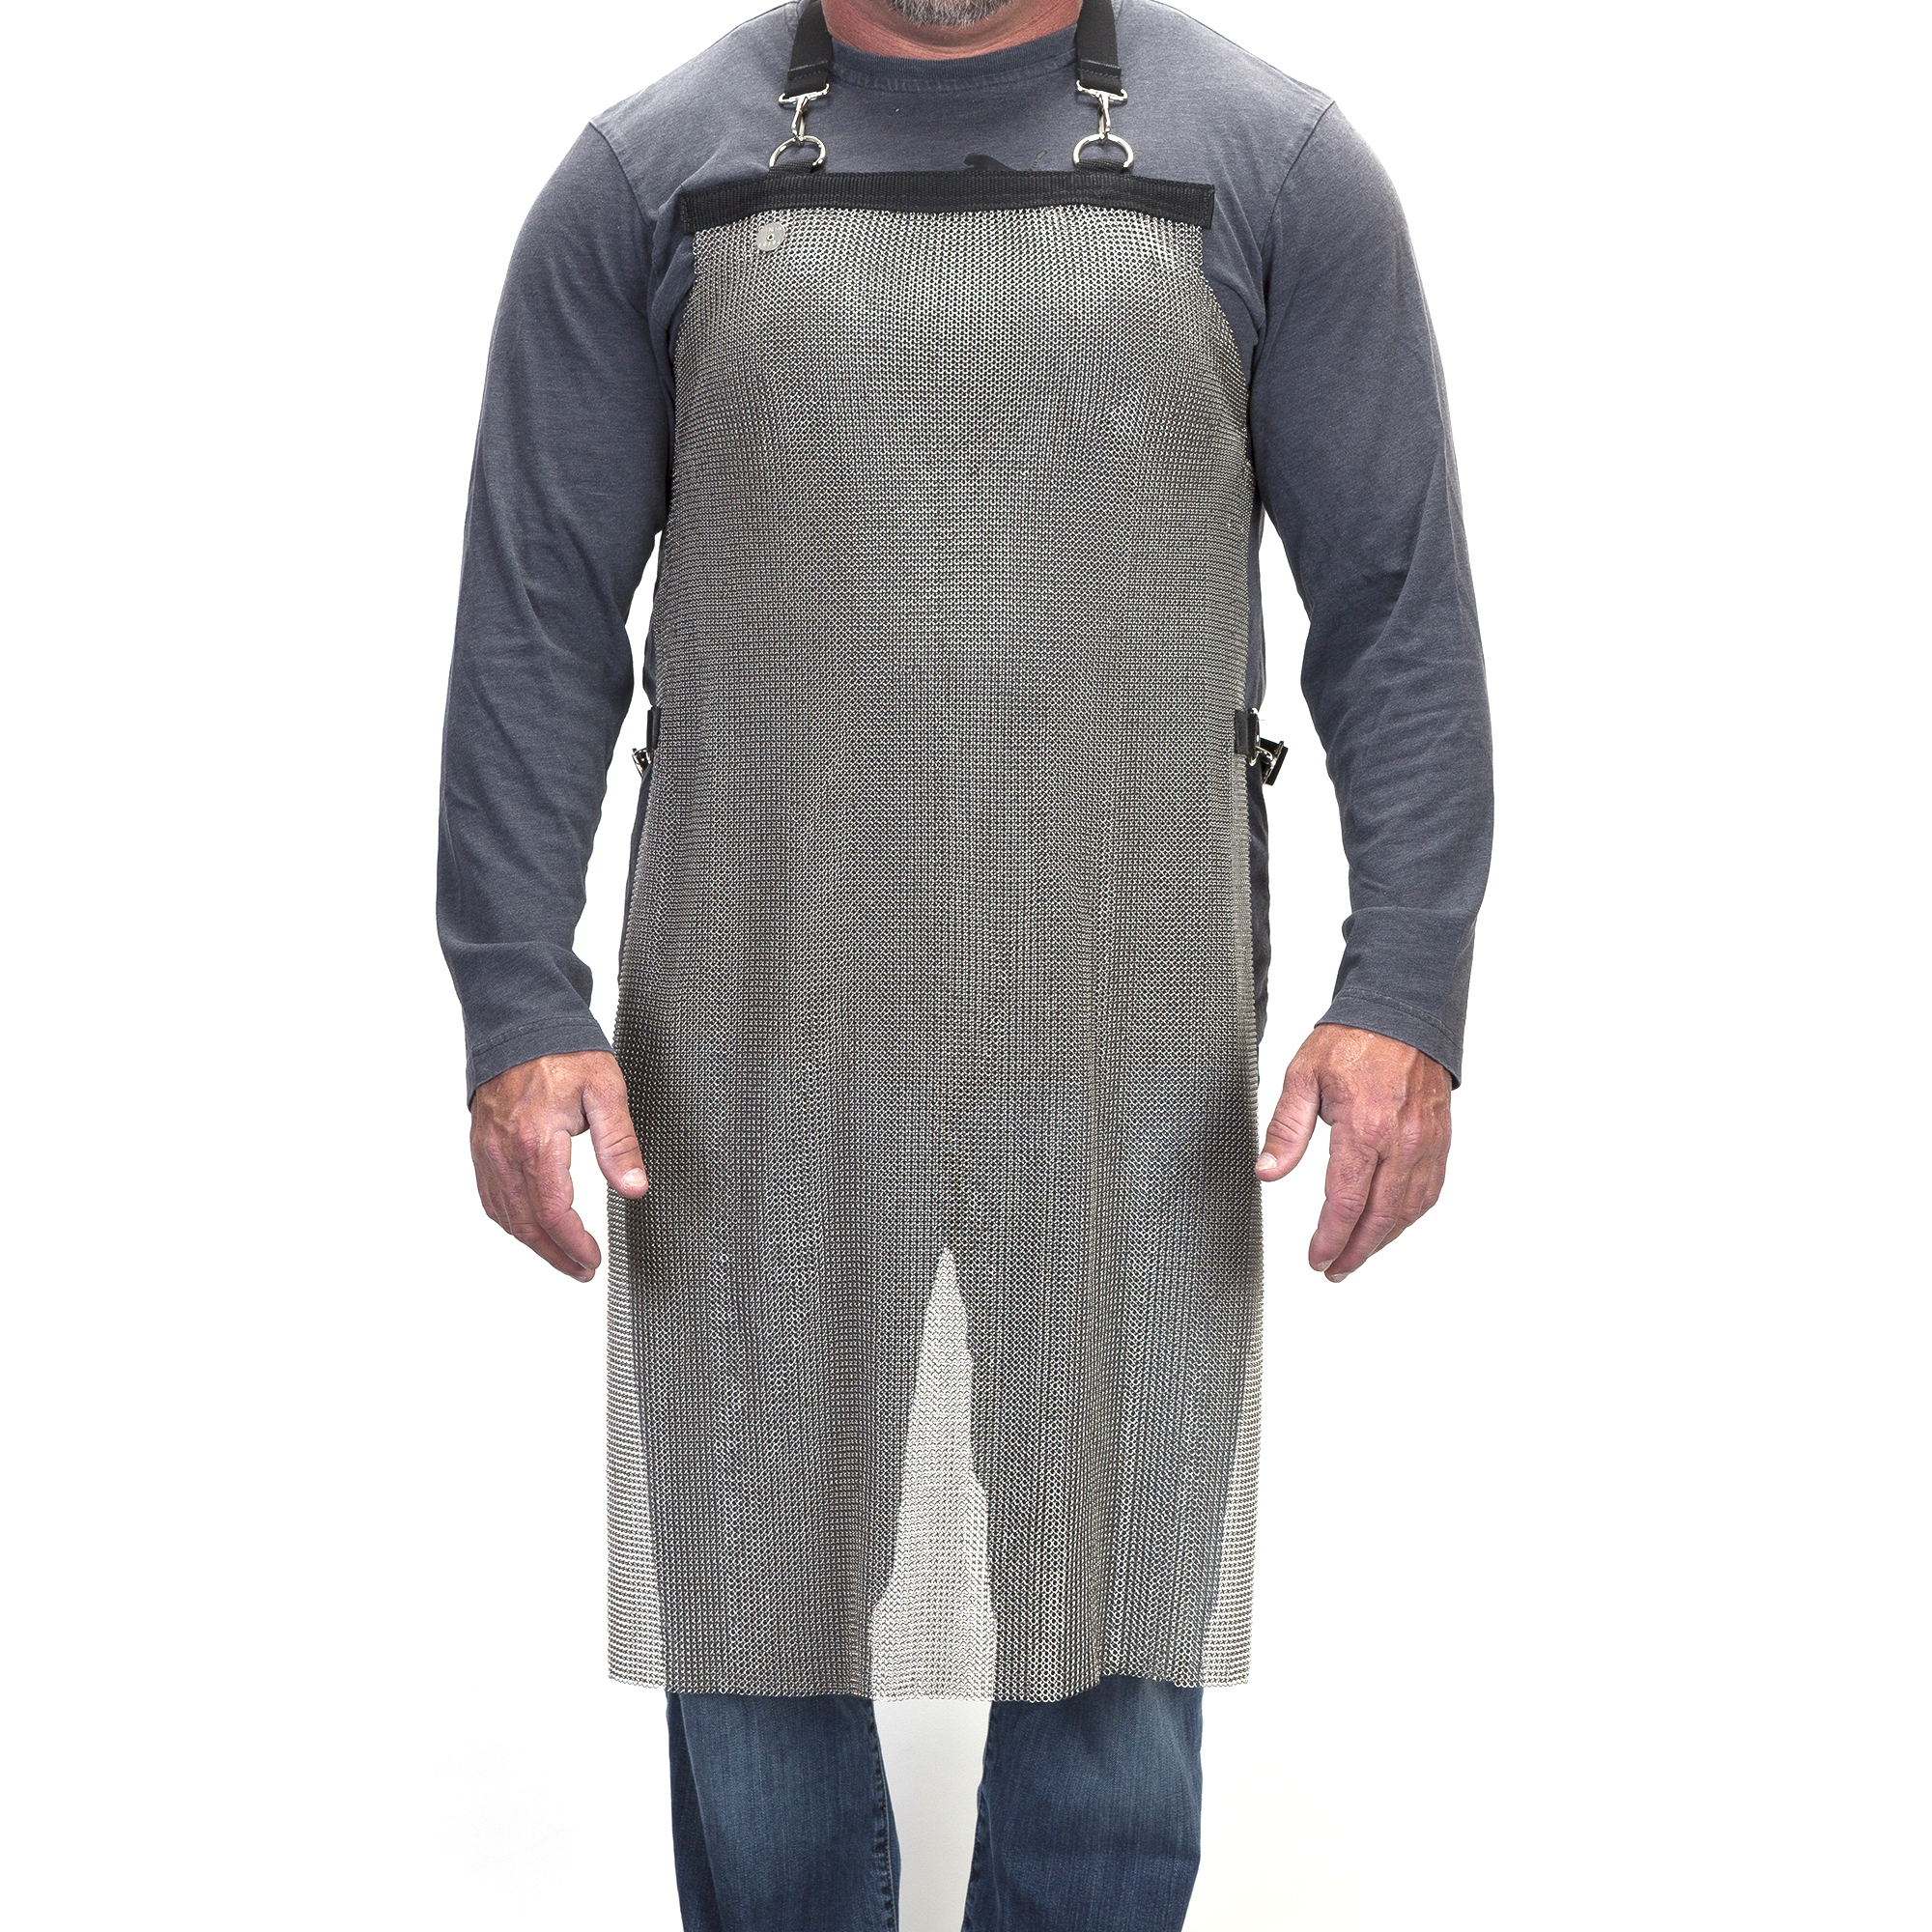 USM-2000 PIP US Mesh® Stainless Steel Mesh Apron with Adjustable Strap, 20` x 30`